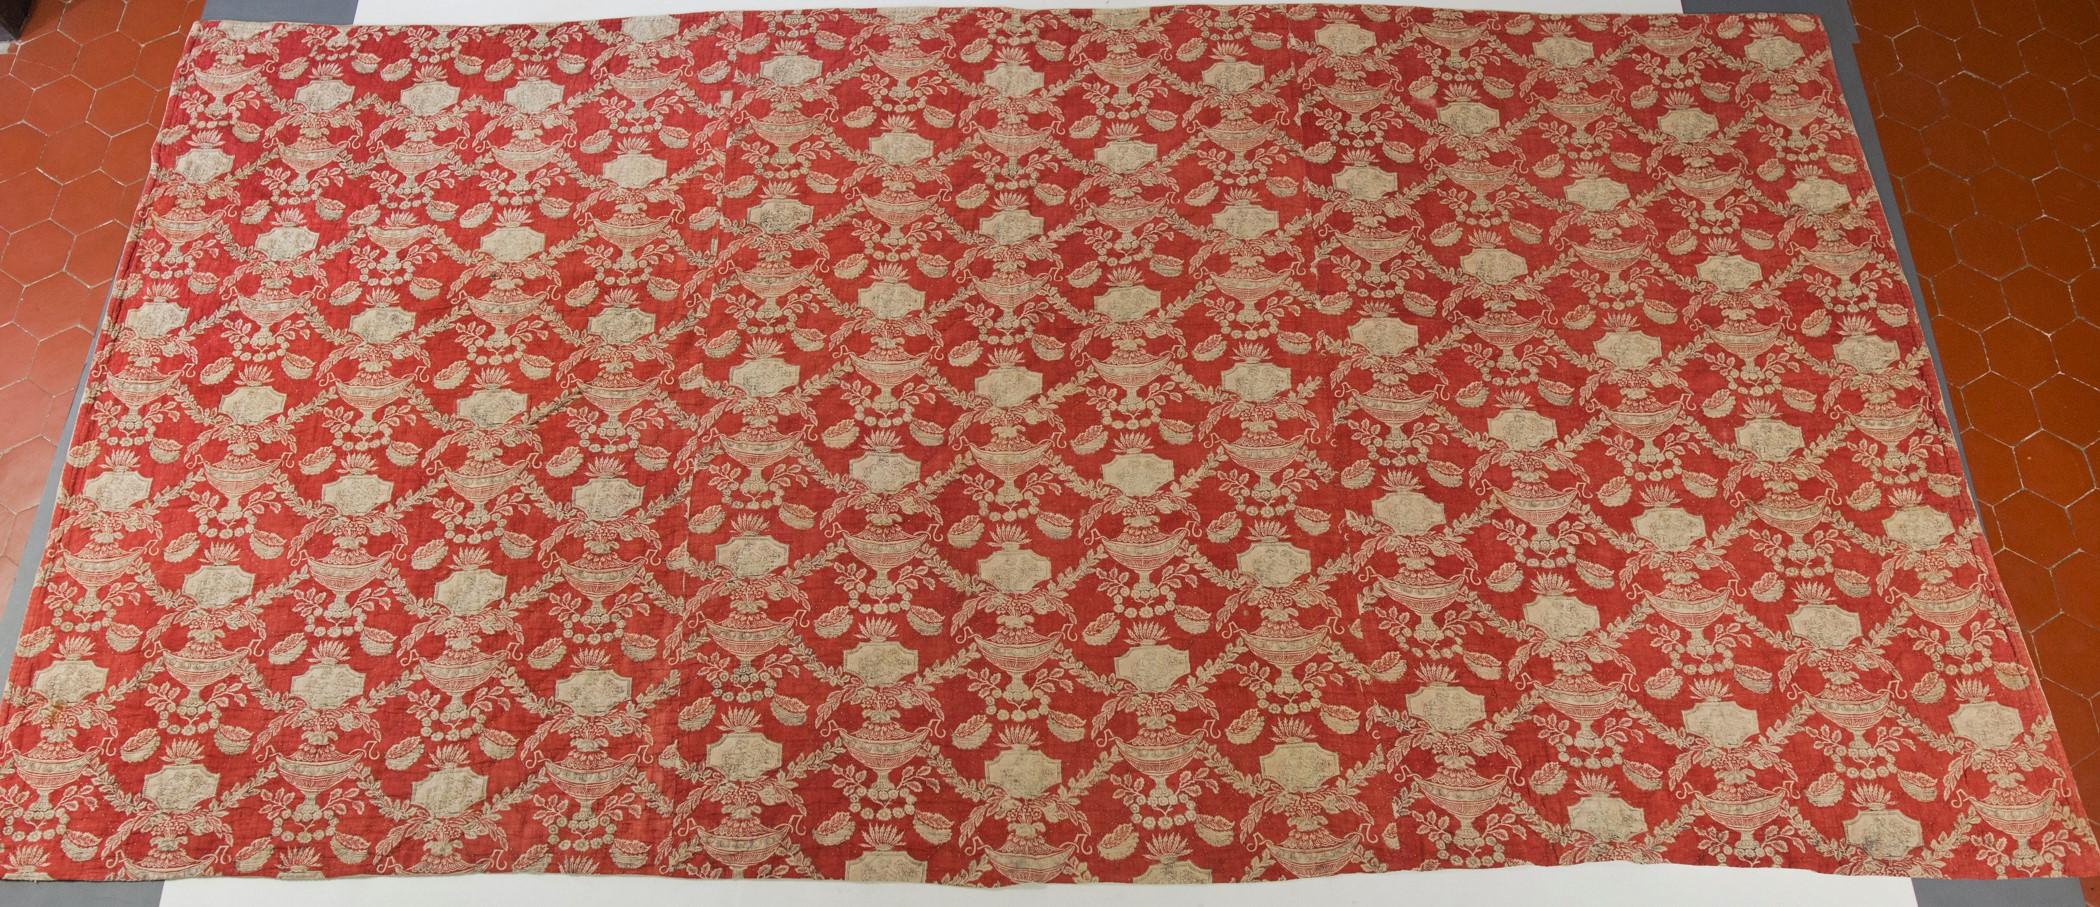 Circa 1785/1800
France

Beautiful quilt or part of bed in cotton printed on a wooden block on a background dyed in madder red from the end of the 18th century. Neoclassical decor arranged with large antique vases surmounted by medallions with scenes